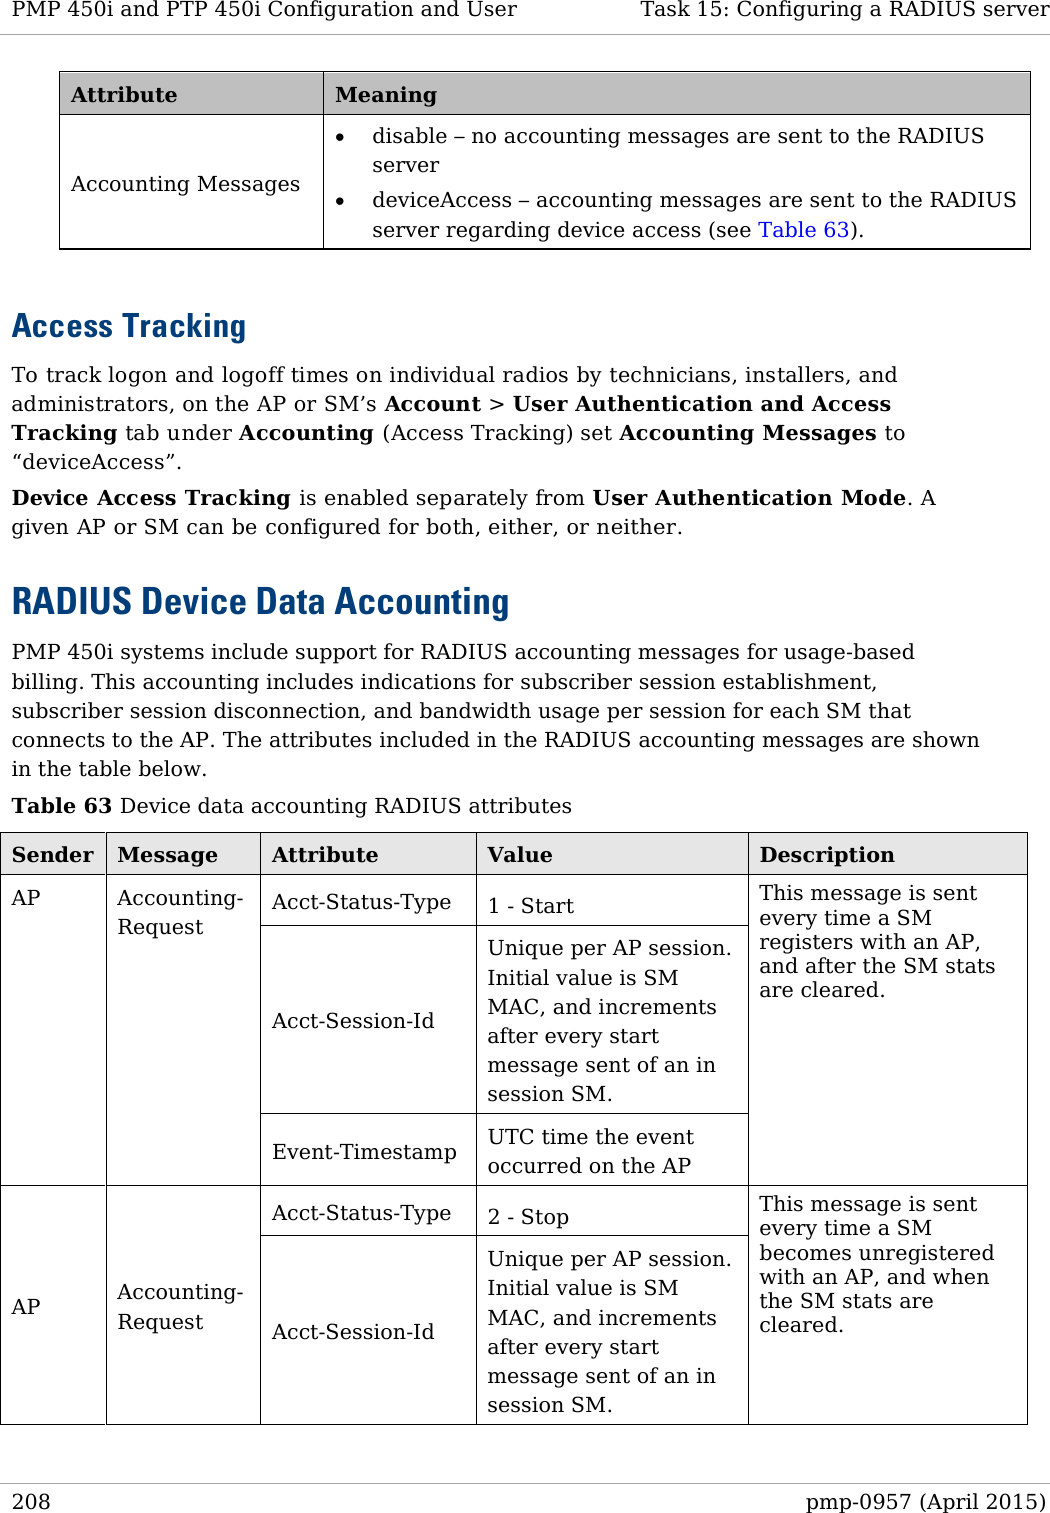 PMP 450i and PTP 450i Configuration and User   Task 15: Configuring a RADIUS server  Attribute Meaning Accounting Messages • disable – no accounting messages are sent to the RADIUS server • deviceAccess – accounting messages are sent to the RADIUS server regarding device access (see Table 63).  Access Tracking To track logon and logoff times on individual radios by technicians, installers, and administrators, on the AP or SM’s Account &gt; User Authentication and Access Tracking tab under Accounting (Access Tracking) set Accounting Messages to “deviceAccess”. Device Access Tracking is enabled separately from User Authentication Mode. A given AP or SM can be configured for both, either, or neither.  RADIUS Device Data Accounting PMP 450i systems include support for RADIUS accounting messages for usage-based billing. This accounting includes indications for subscriber session establishment, subscriber session disconnection, and bandwidth usage per session for each SM that connects to the AP. The attributes included in the RADIUS accounting messages are shown in the table below. Table 63 Device data accounting RADIUS attributes Sender Message Attribute Value Description AP Accounting-Request Acct-Status-Type 1 - Start This message is sent every time a SM registers with an AP, and after the SM stats are cleared. Acct-Session-Id Unique per AP session.  Initial value is SM MAC, and increments after every start message sent of an in session SM. Event-Timestamp UTC time the event occurred on the AP AP Accounting-Request Acct-Status-Type 2 - Stop This message is sent every time a SM becomes unregistered with an AP, and when the SM stats are cleared. Acct-Session-Id Unique per AP session.  Initial value is SM MAC, and increments after every start message sent of an in session SM. 208  pmp-0957 (April 2015)  